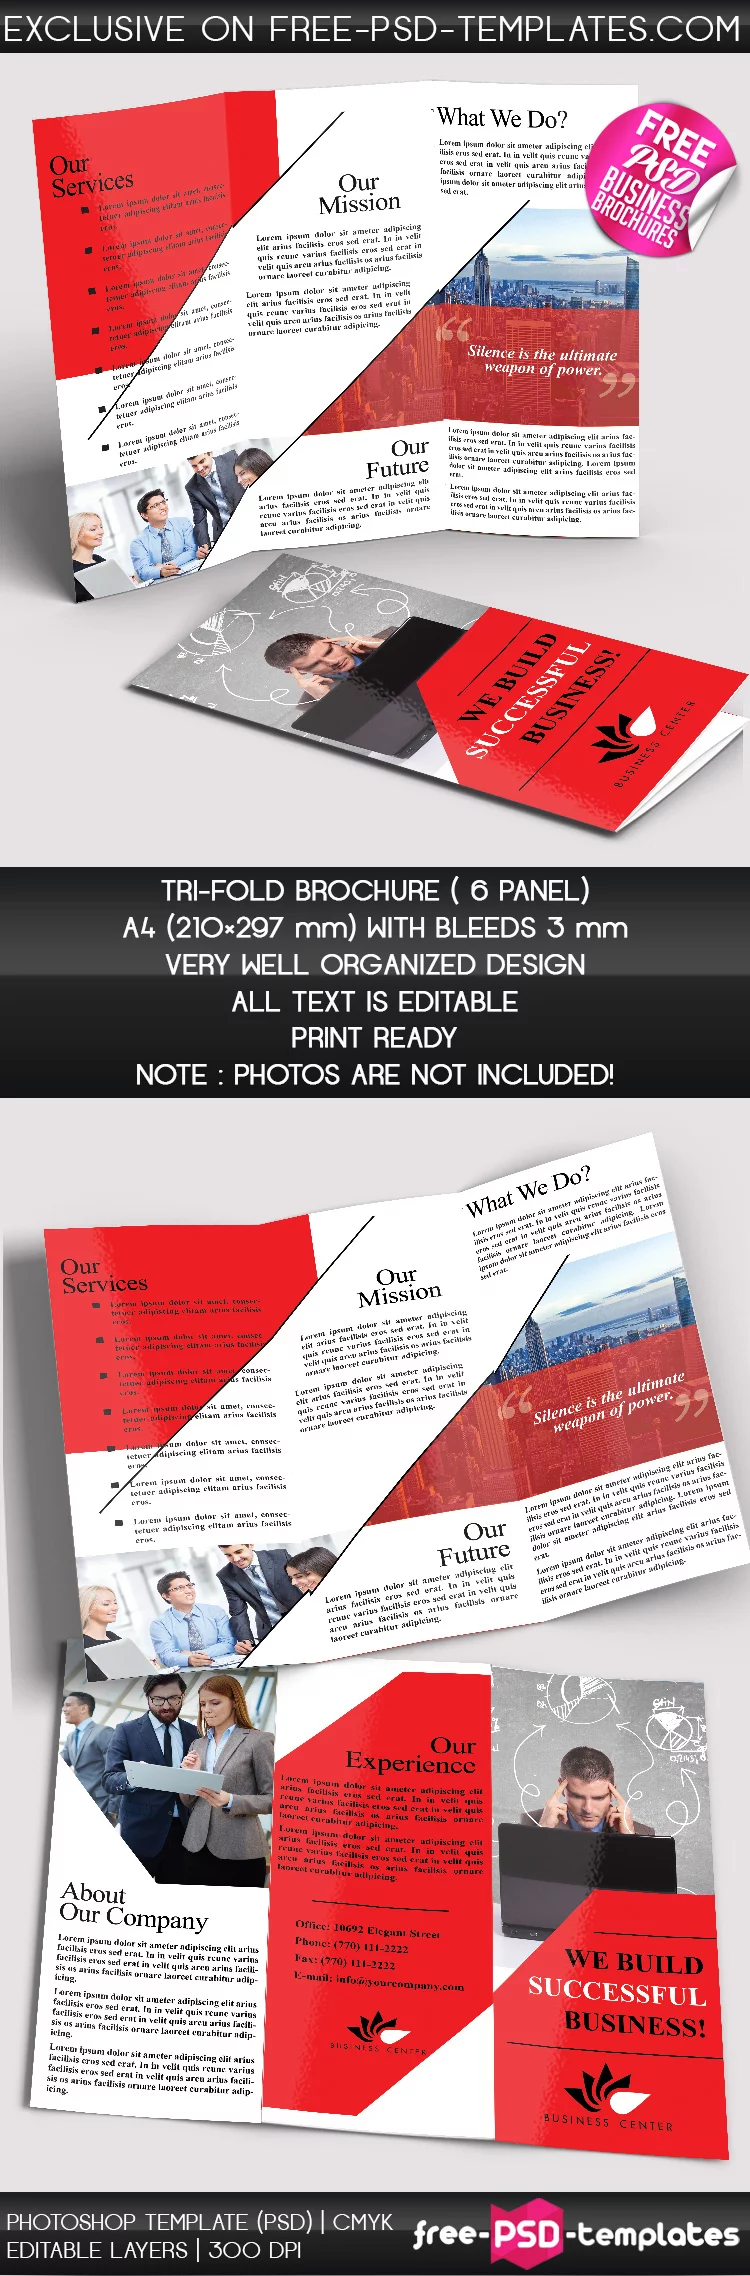 Preview_Business_Brochures